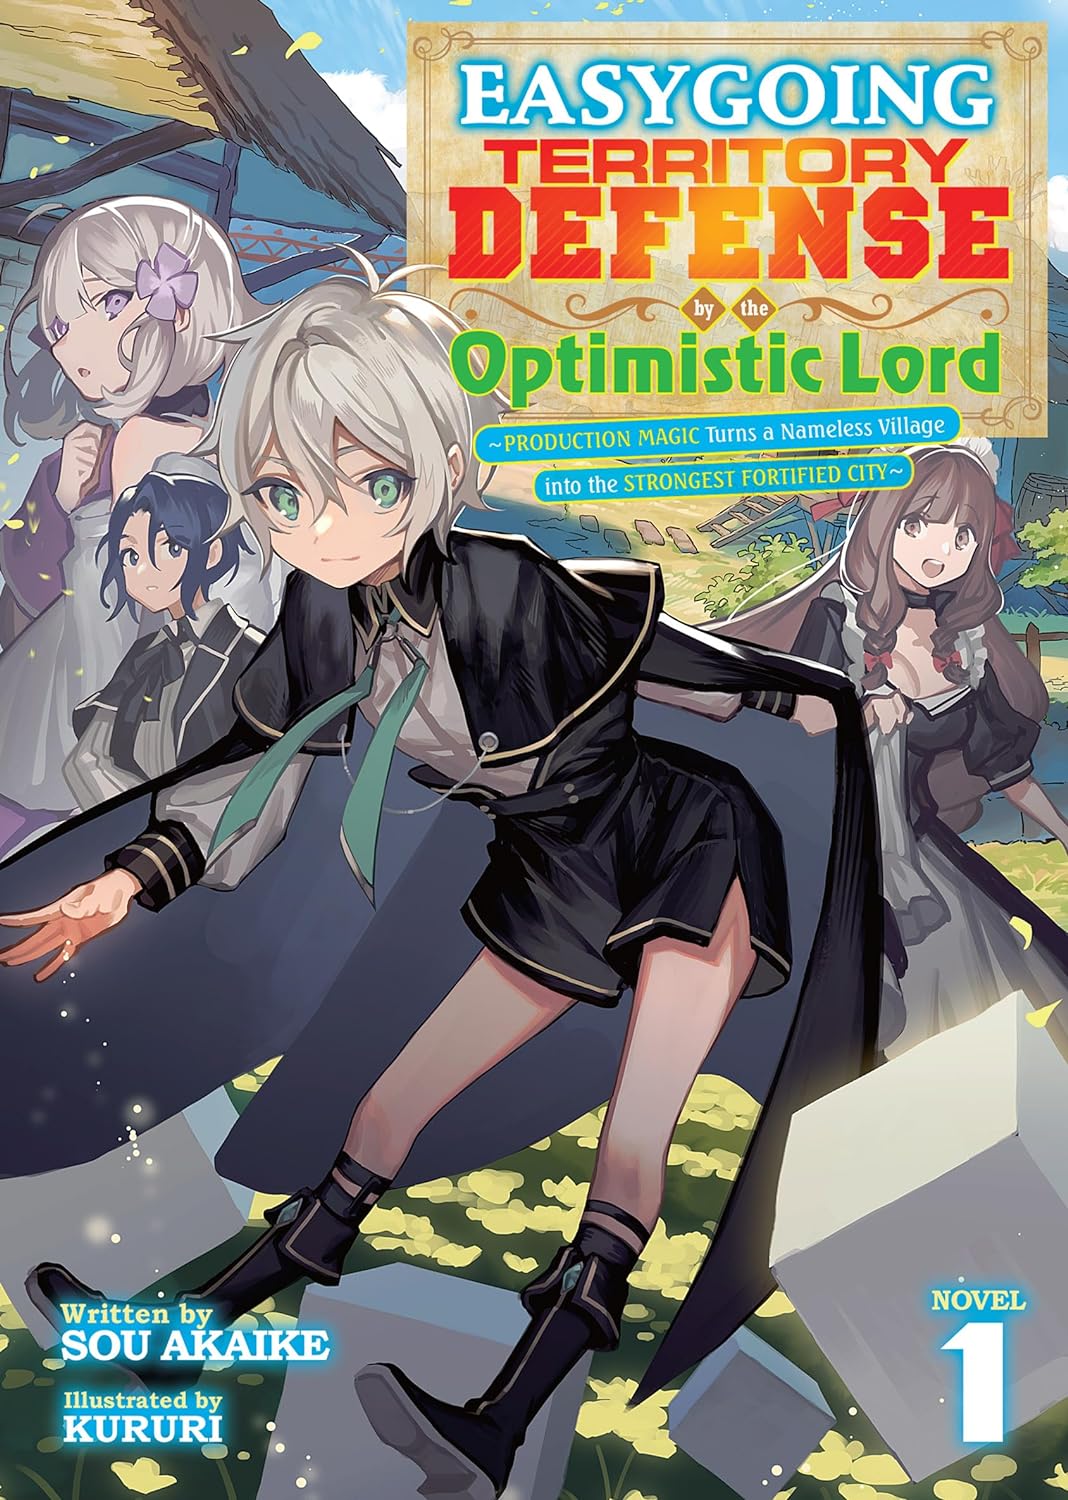 Easygoing Territory Defense by the Optimistic Lord: Production Magic Turns a Nameless Village Into the Strongest Fortified City (Light Novel) Vol. 01